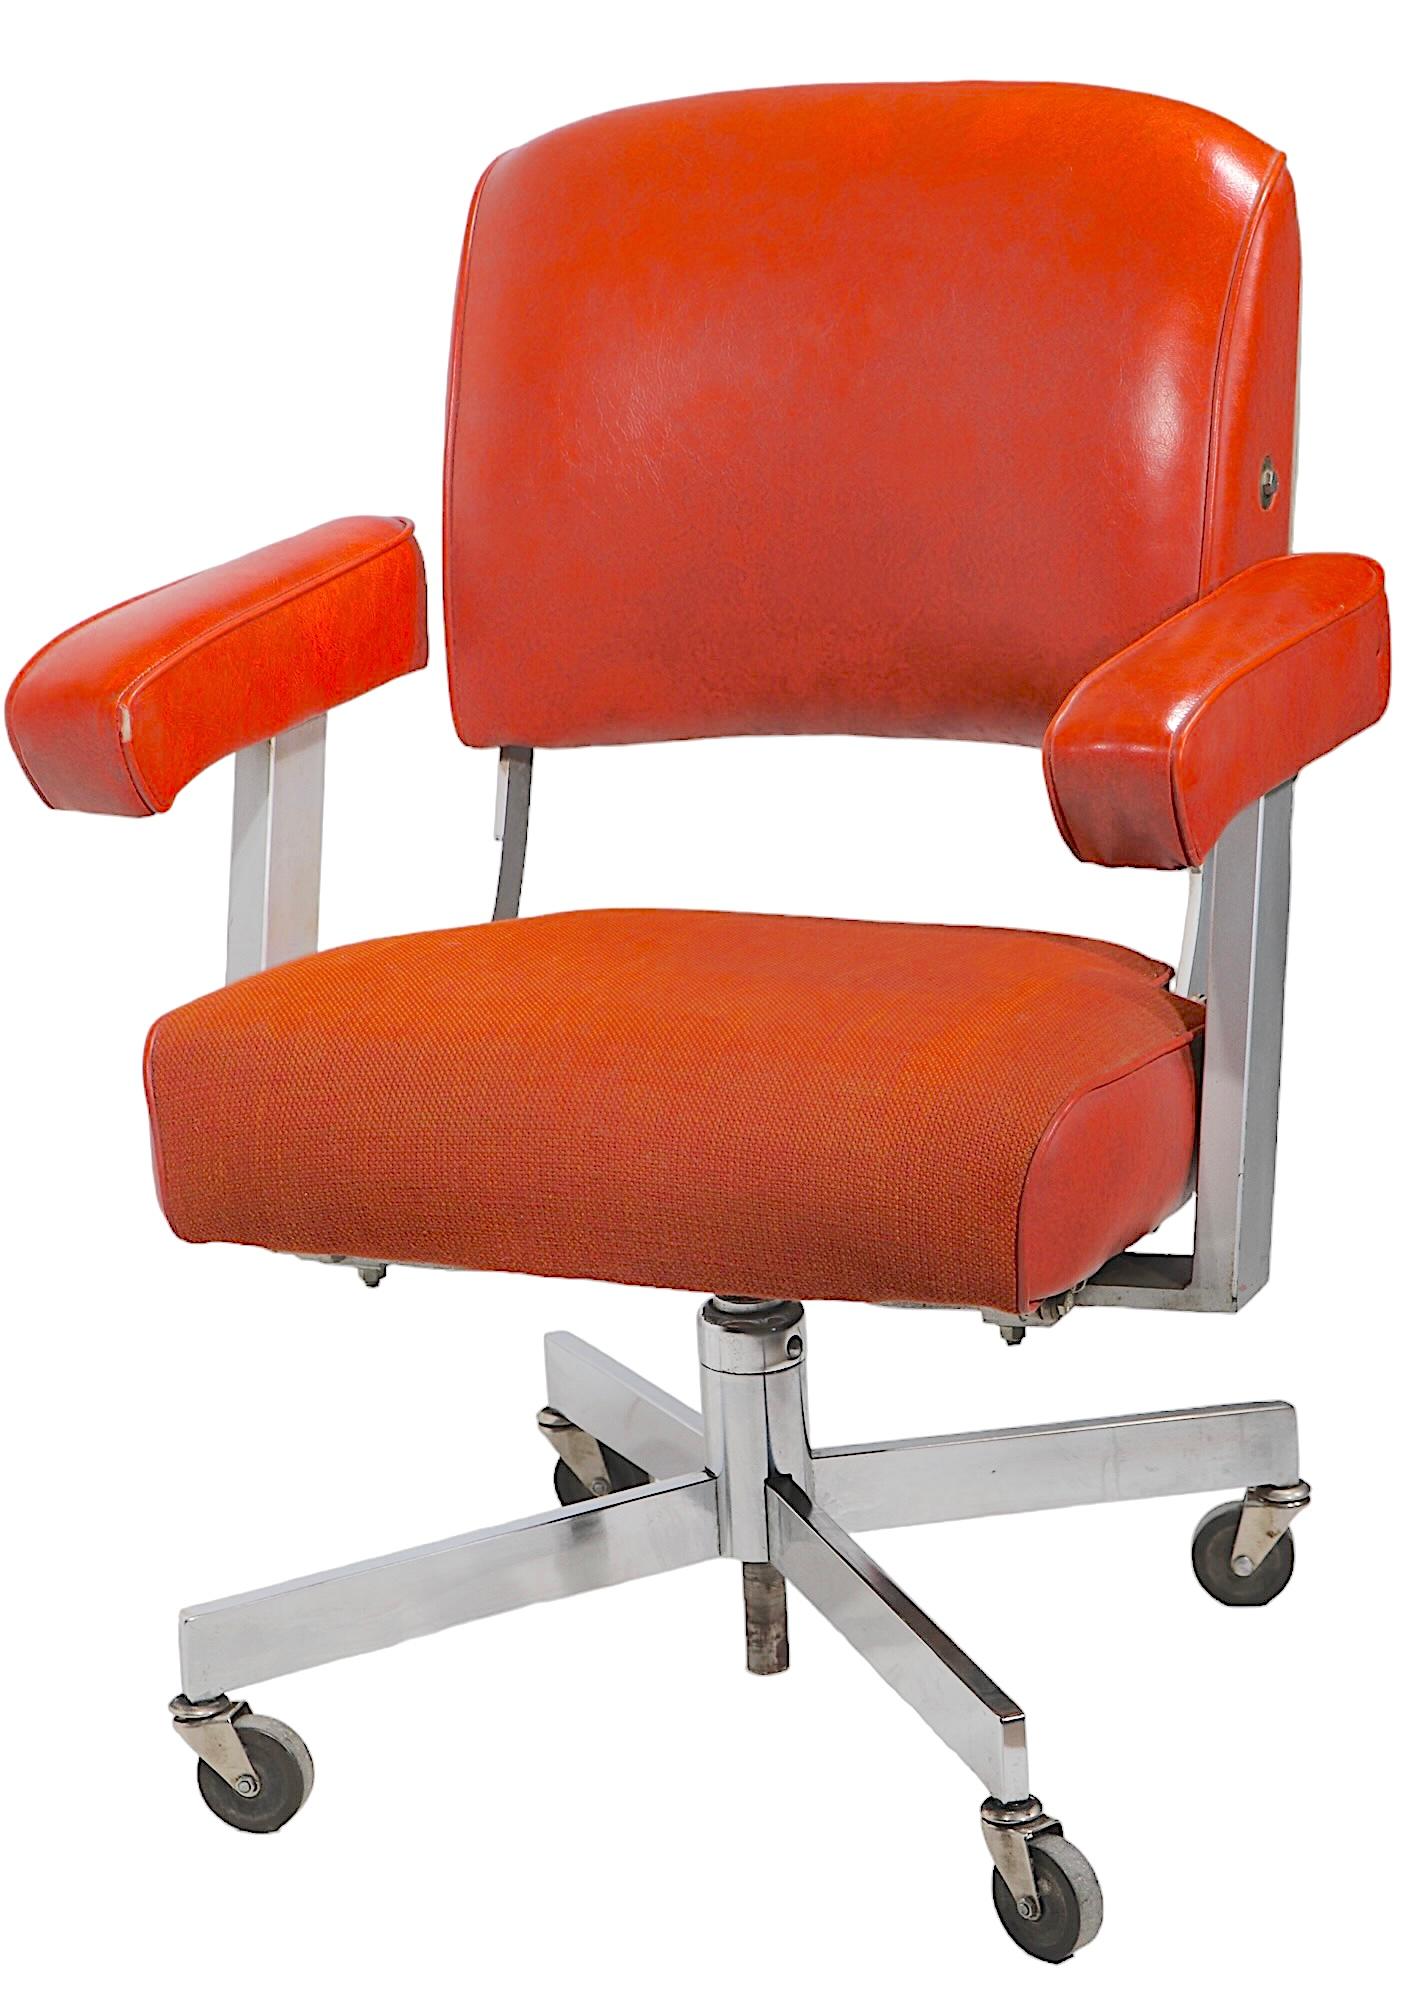 Exceptional Industrial, Mid Century  swivel office, desk chair by The  DoMore Chair Company. The chair features a chrome base on wheel castor feet, thick tweed and vinyl seat, vinyl, upholstered armrests and back support.The back support cushion